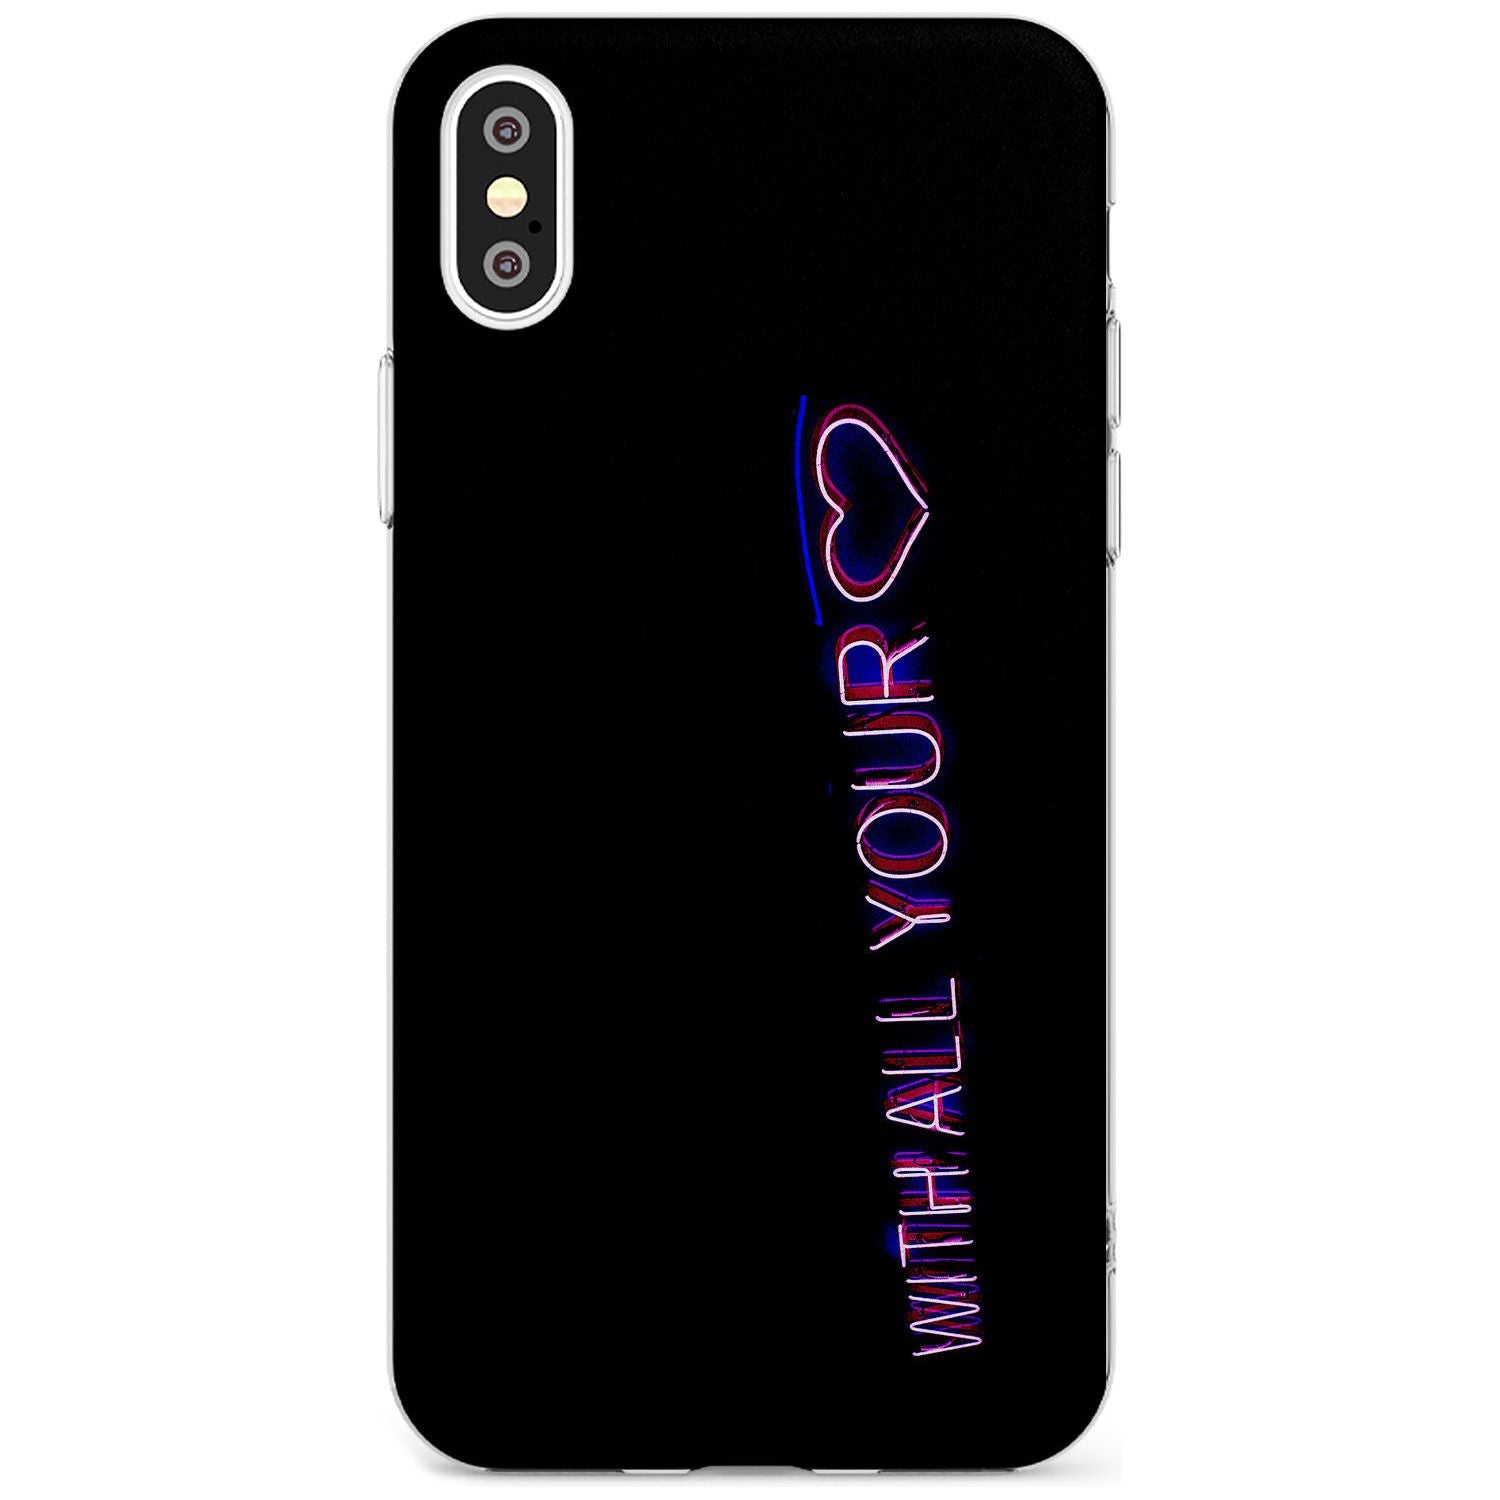 With All Your Heart Neon Sign Slim TPU Phone Case Warehouse X XS Max XR